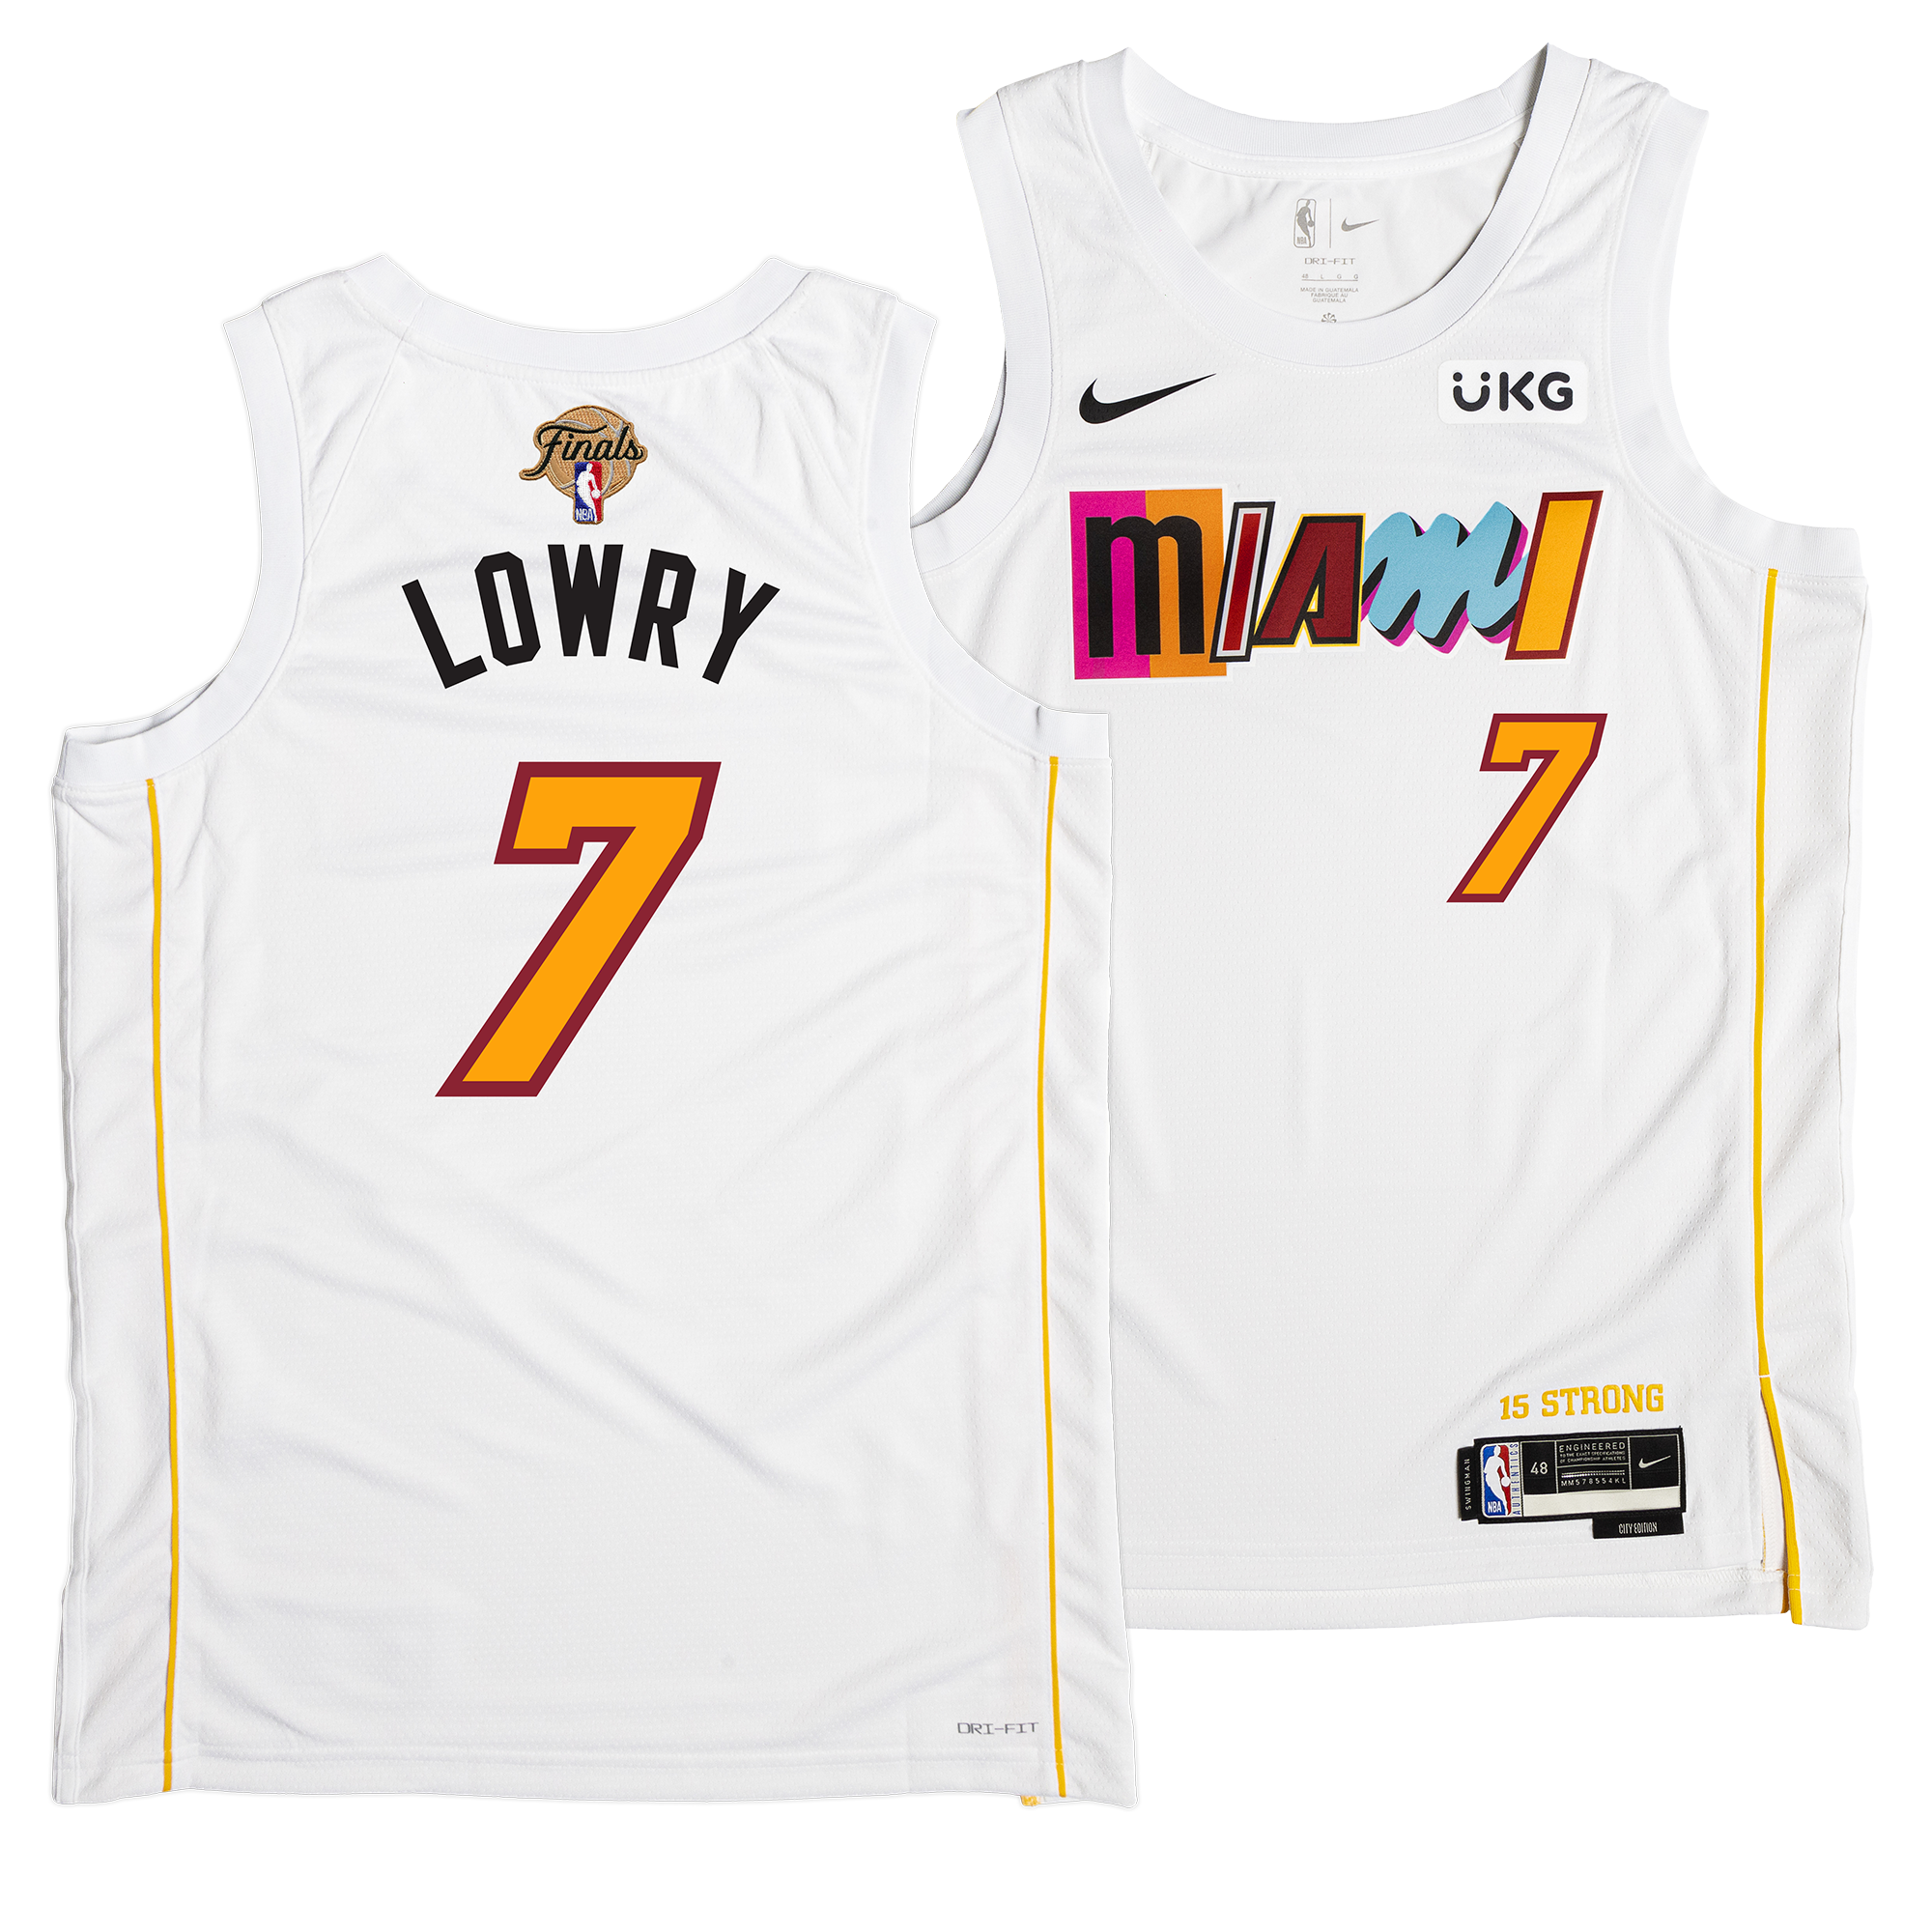 Kyle Lowry All-Star Game NBA Jerseys for sale